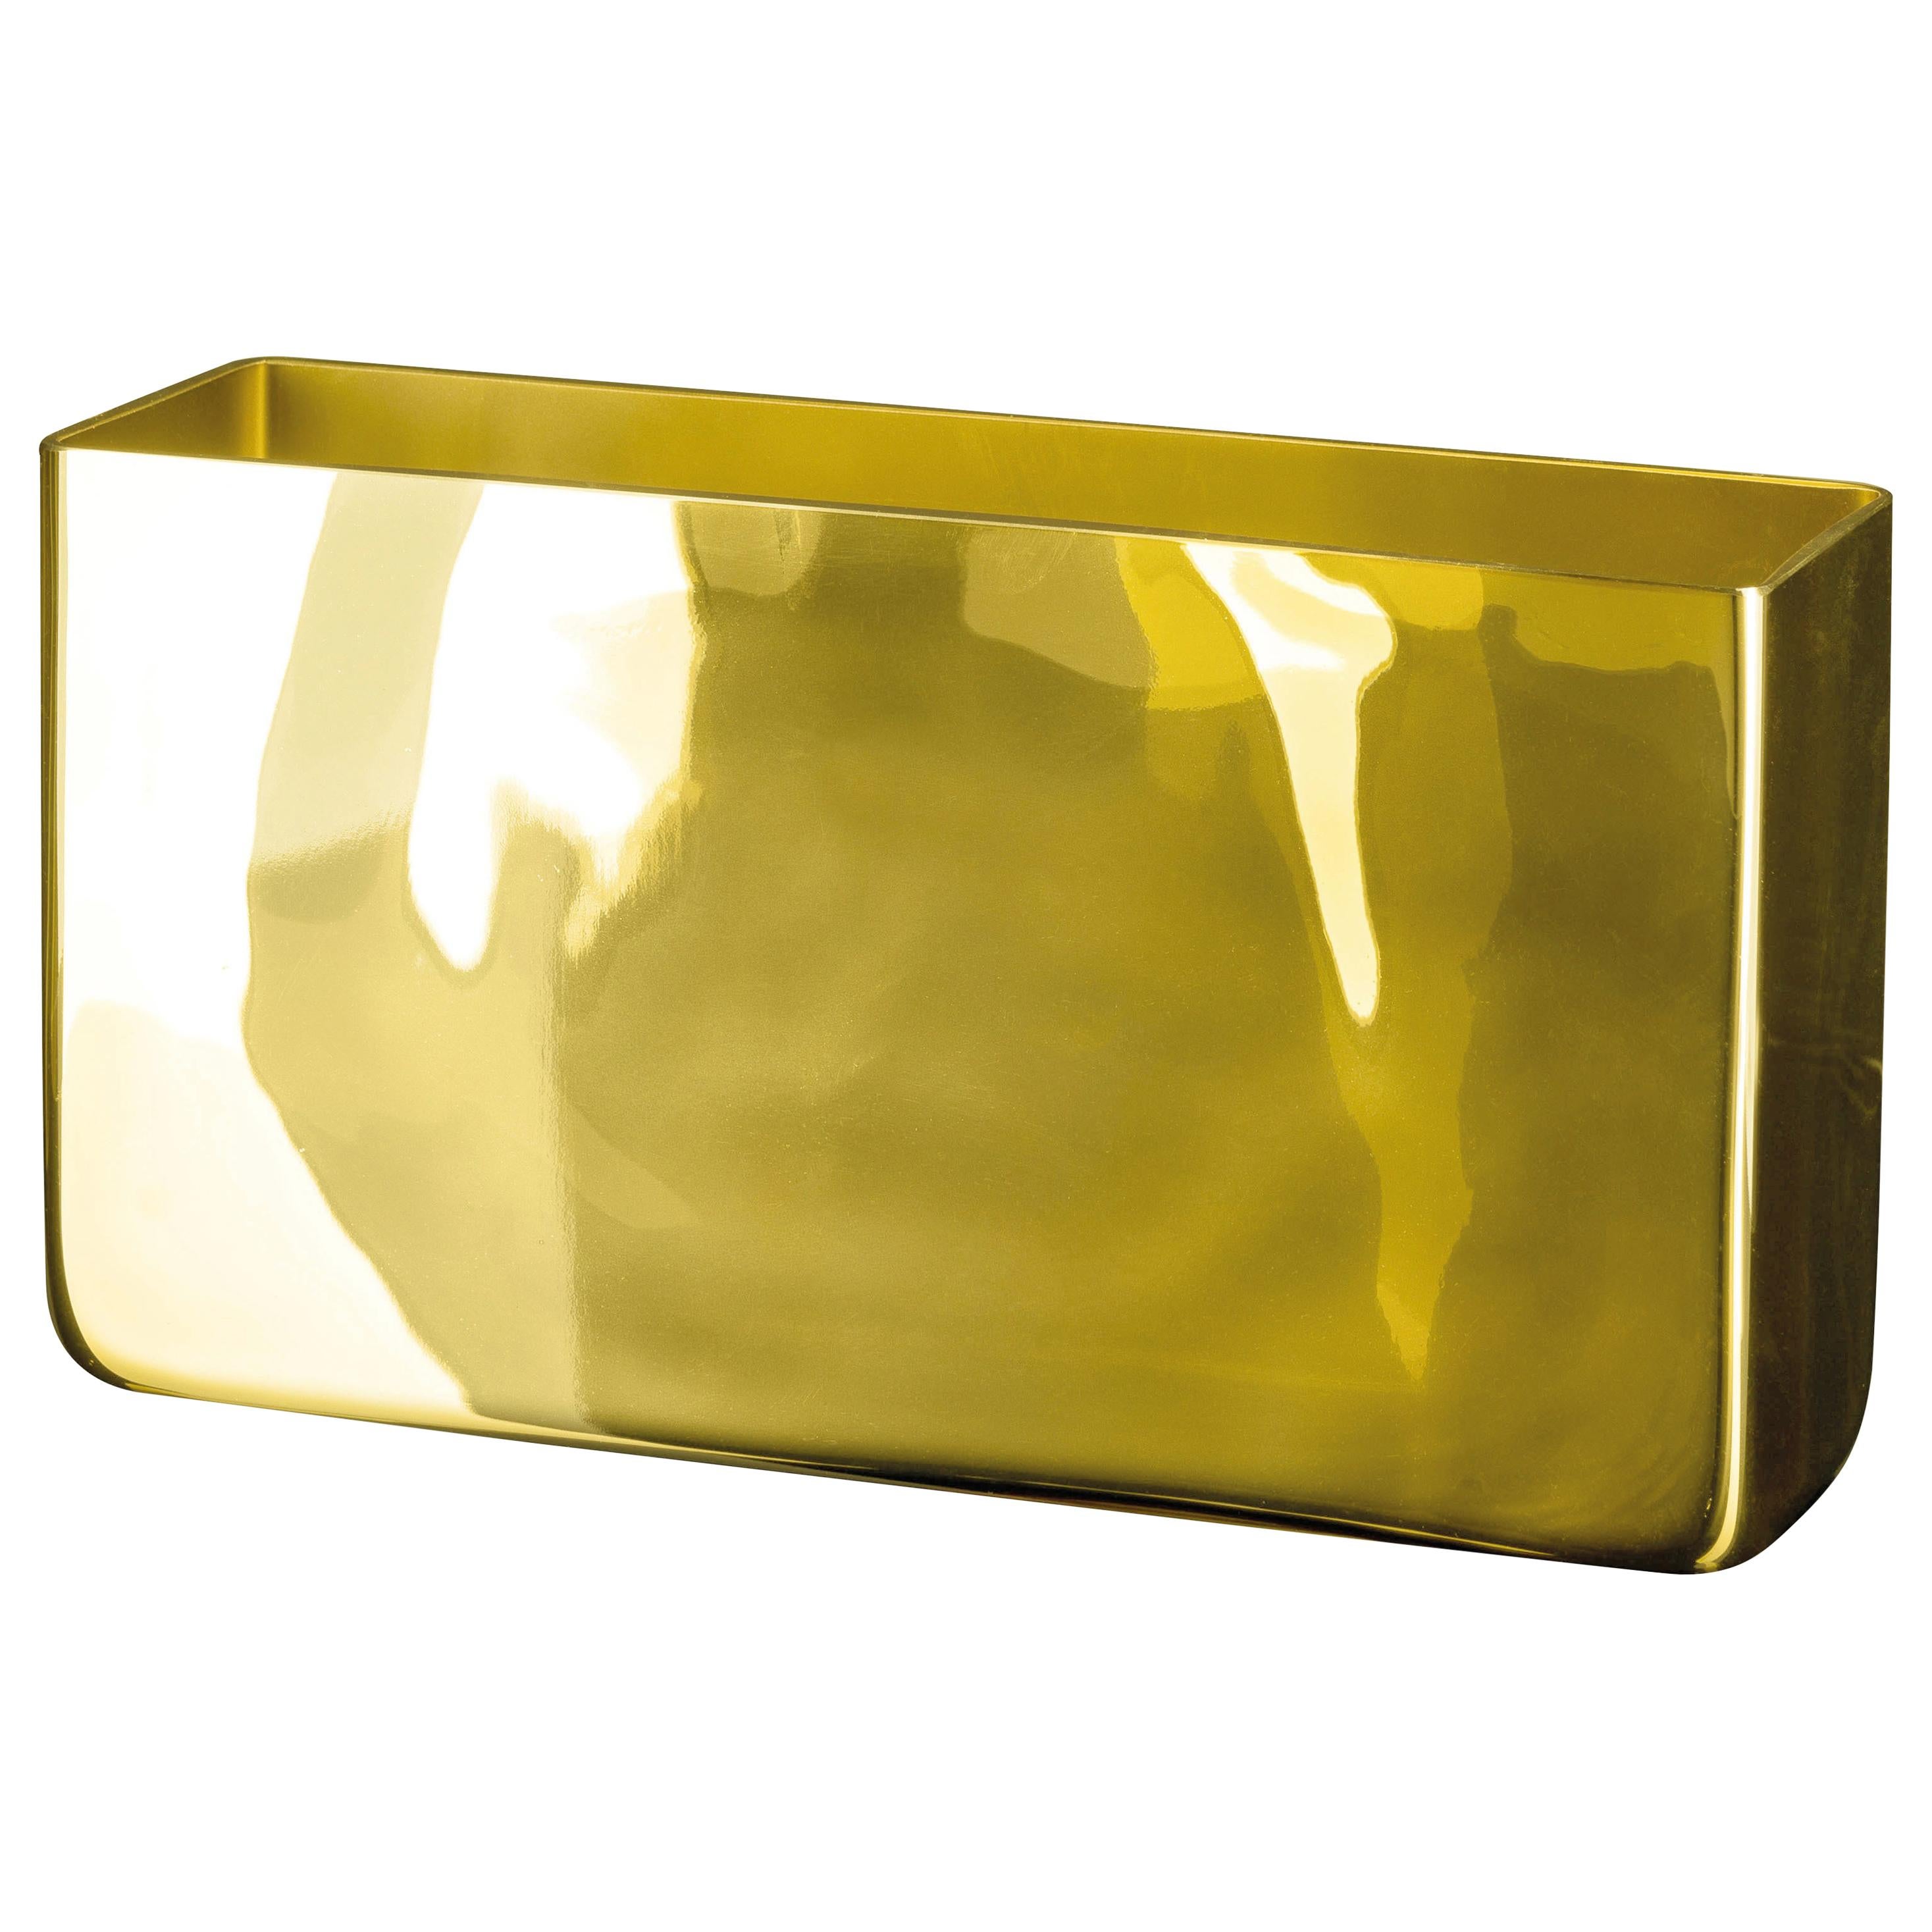 Vase Rectangular Wallet, Gold Color, in Glass, Italy For Sale